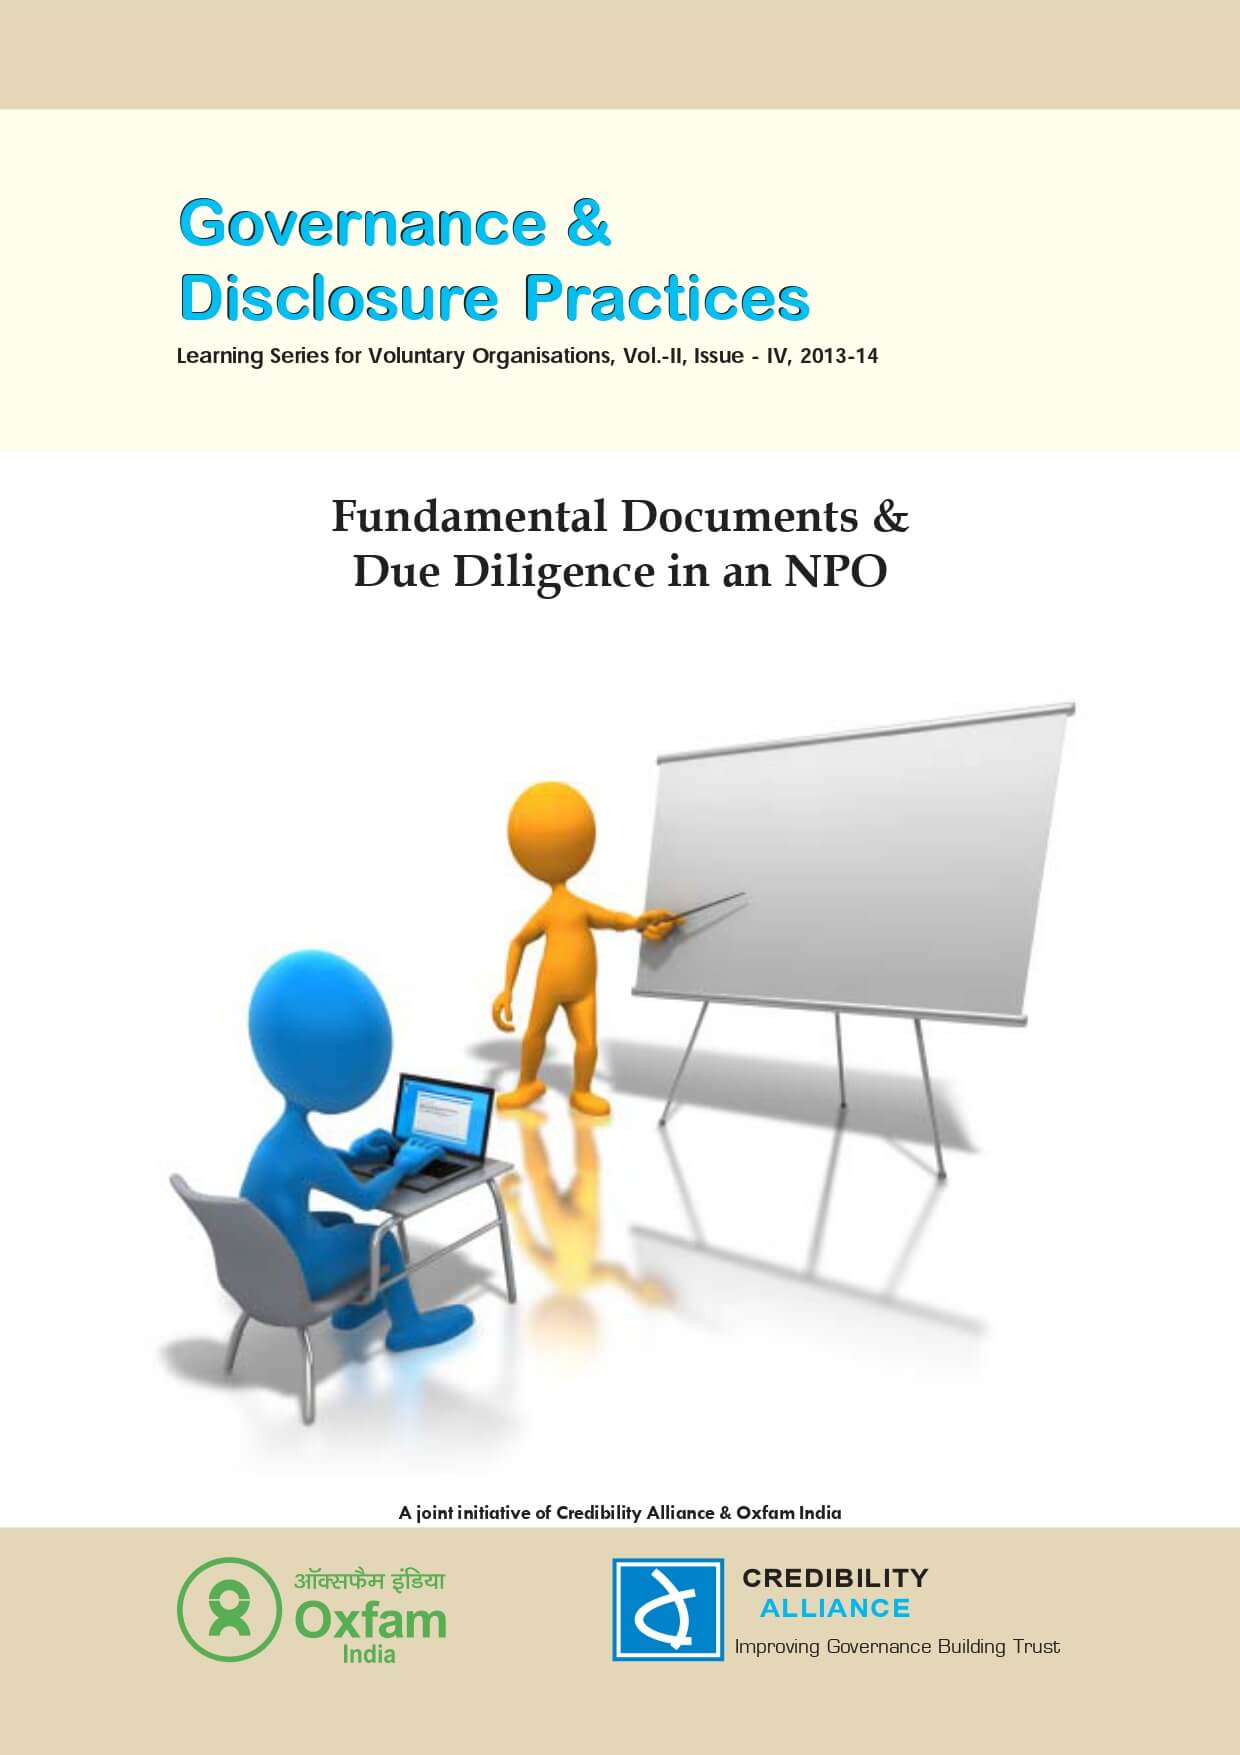 Governance and disclosures_pages-to-jpg-0001